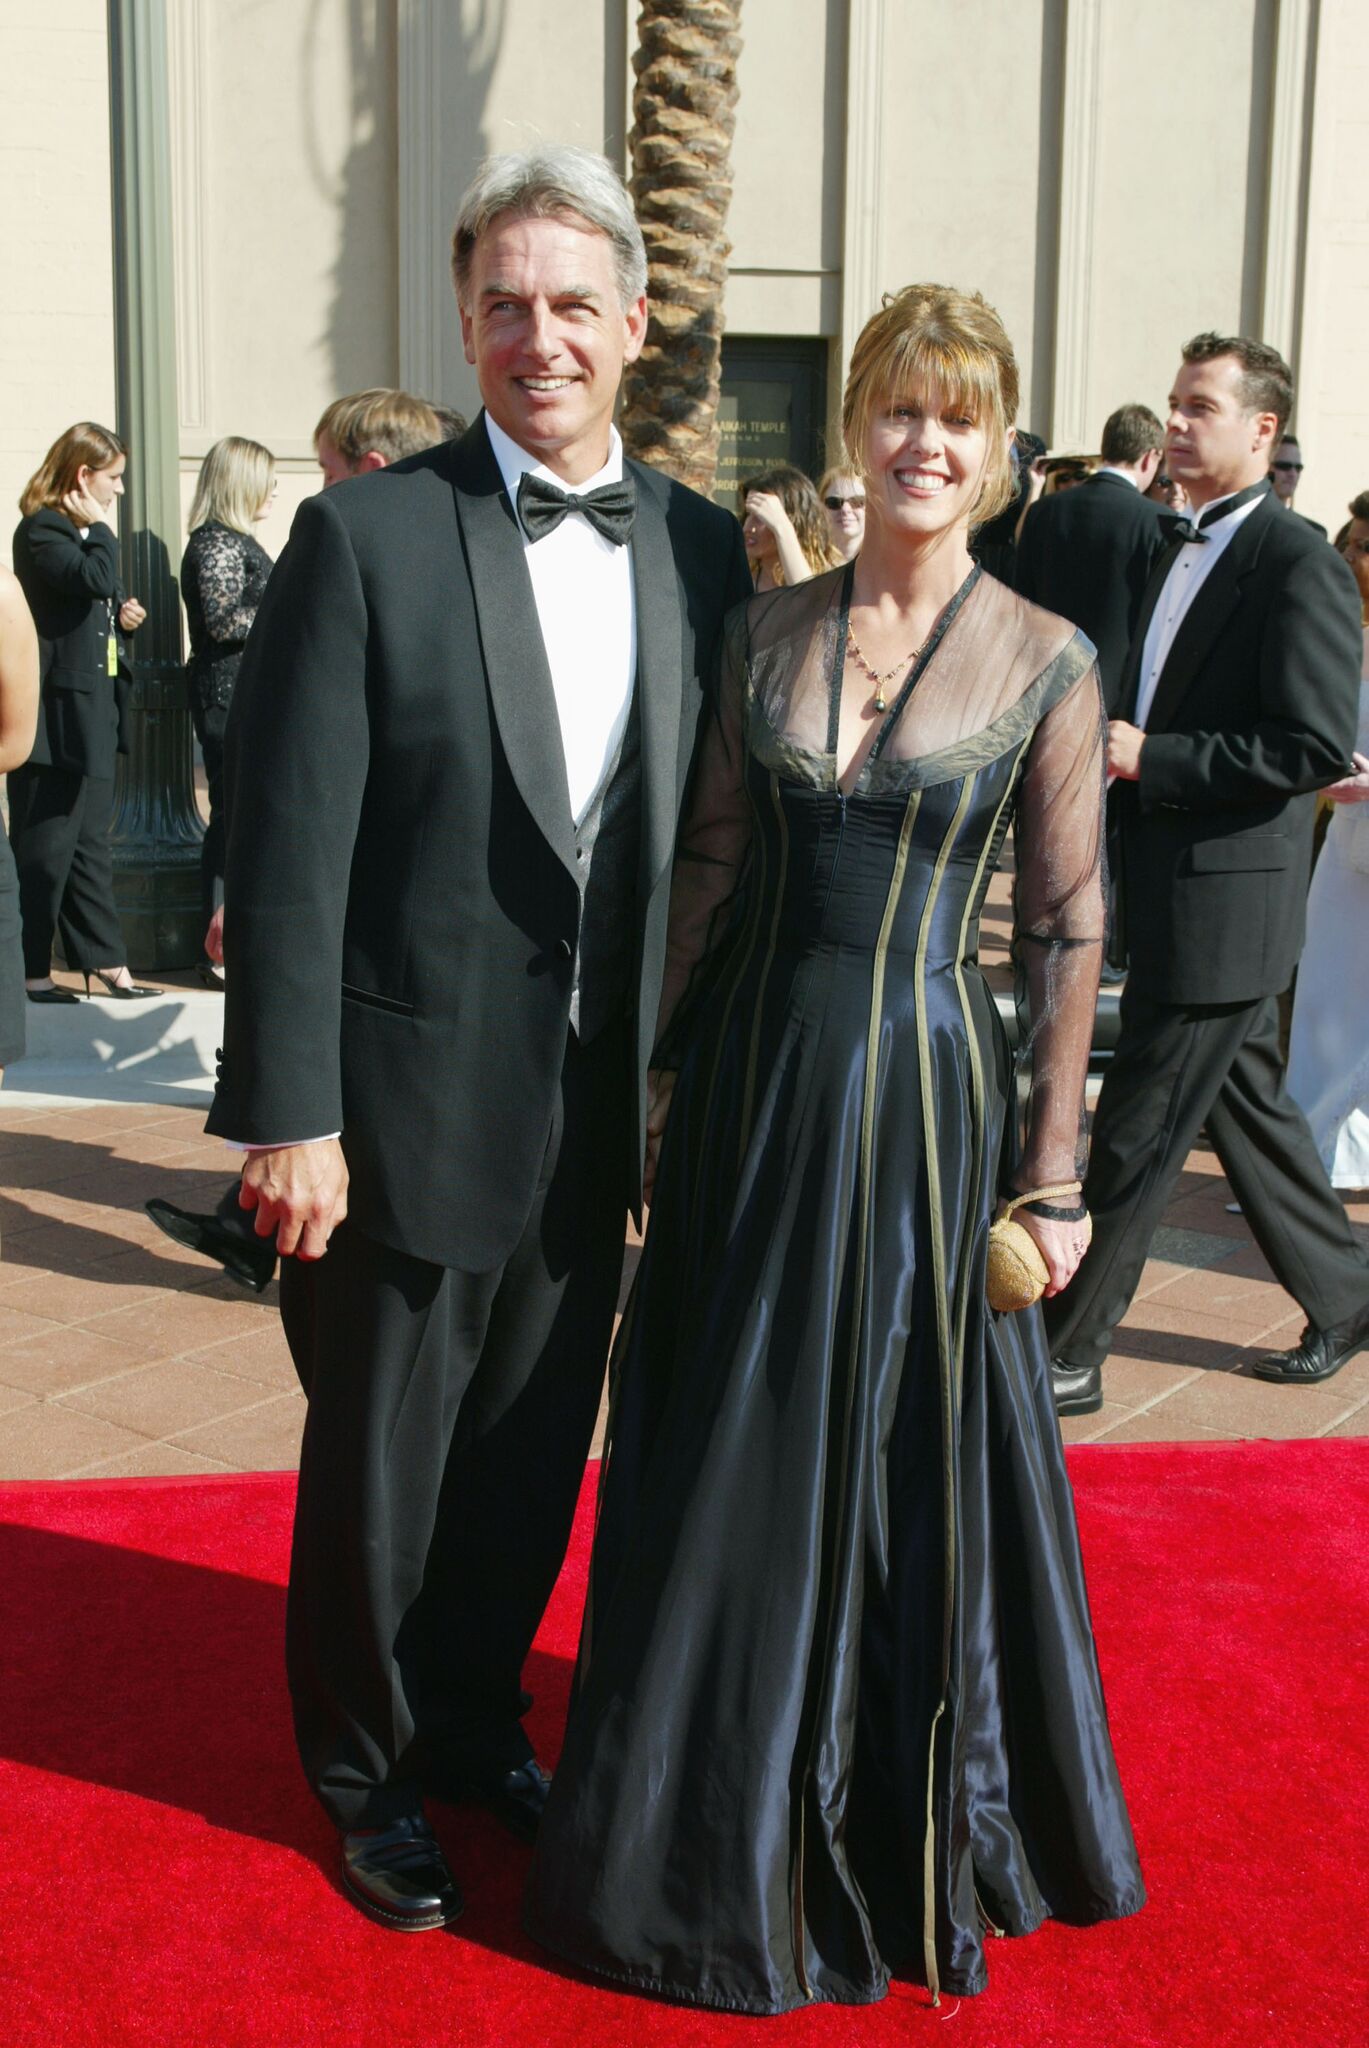 Mark Harmon and Pam Dawber at the 2002 Creative Arts Emmy Awards at the Shrine Auditorium. | Source: Getty Images